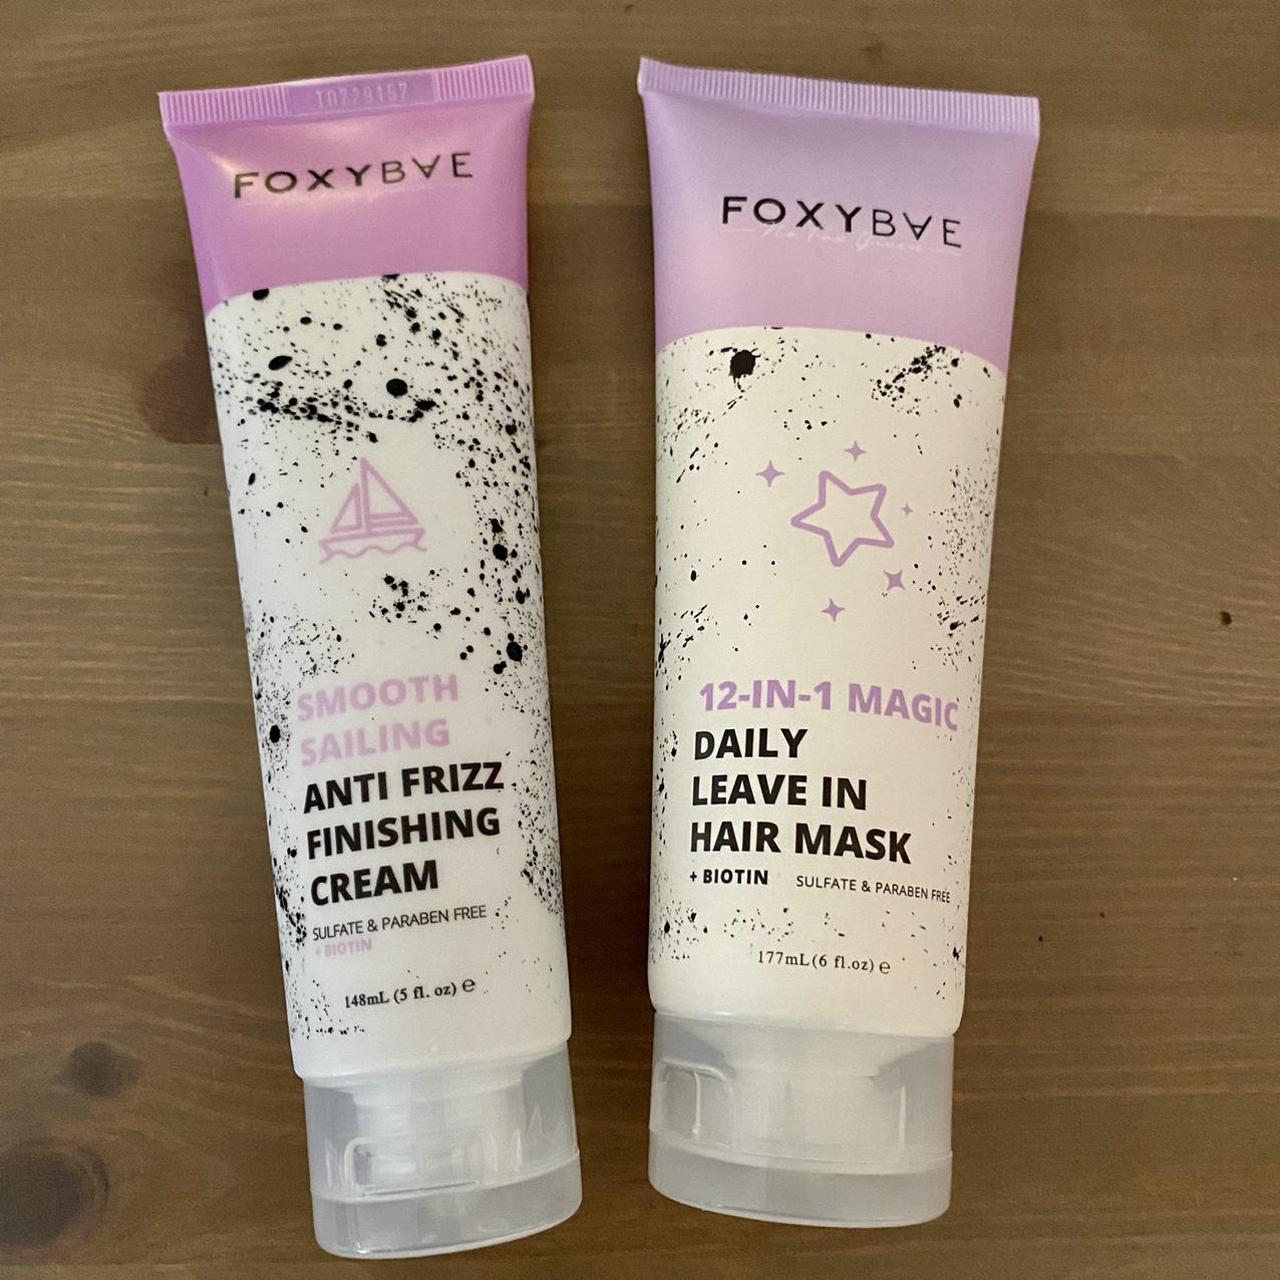 Product Image 2 - Foxybae Hair Care Duo
retail value: